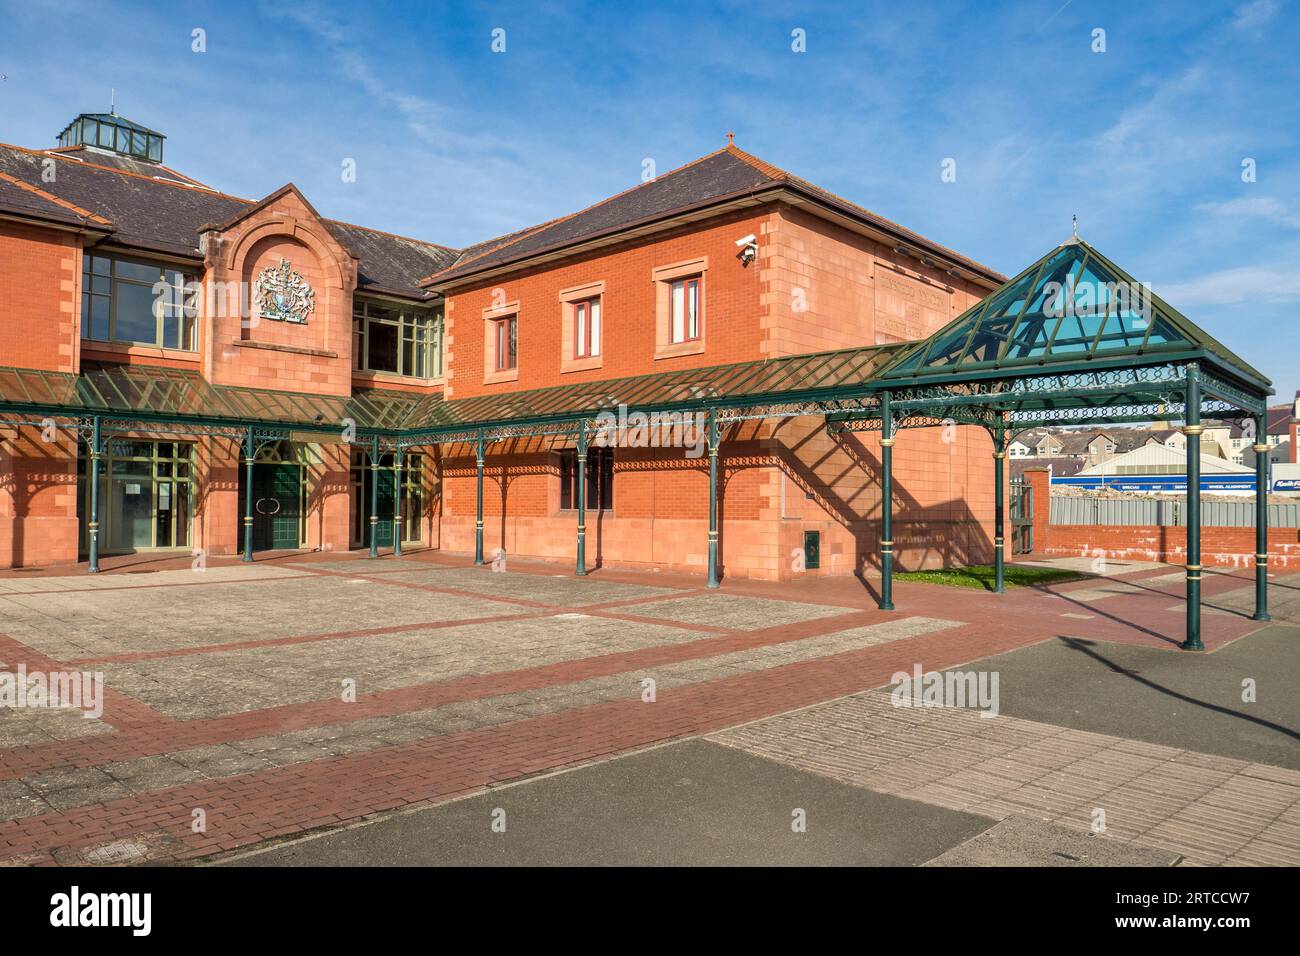 The Magistrates Court building in Llandudno, Conwy, North Wales. Stock Photo